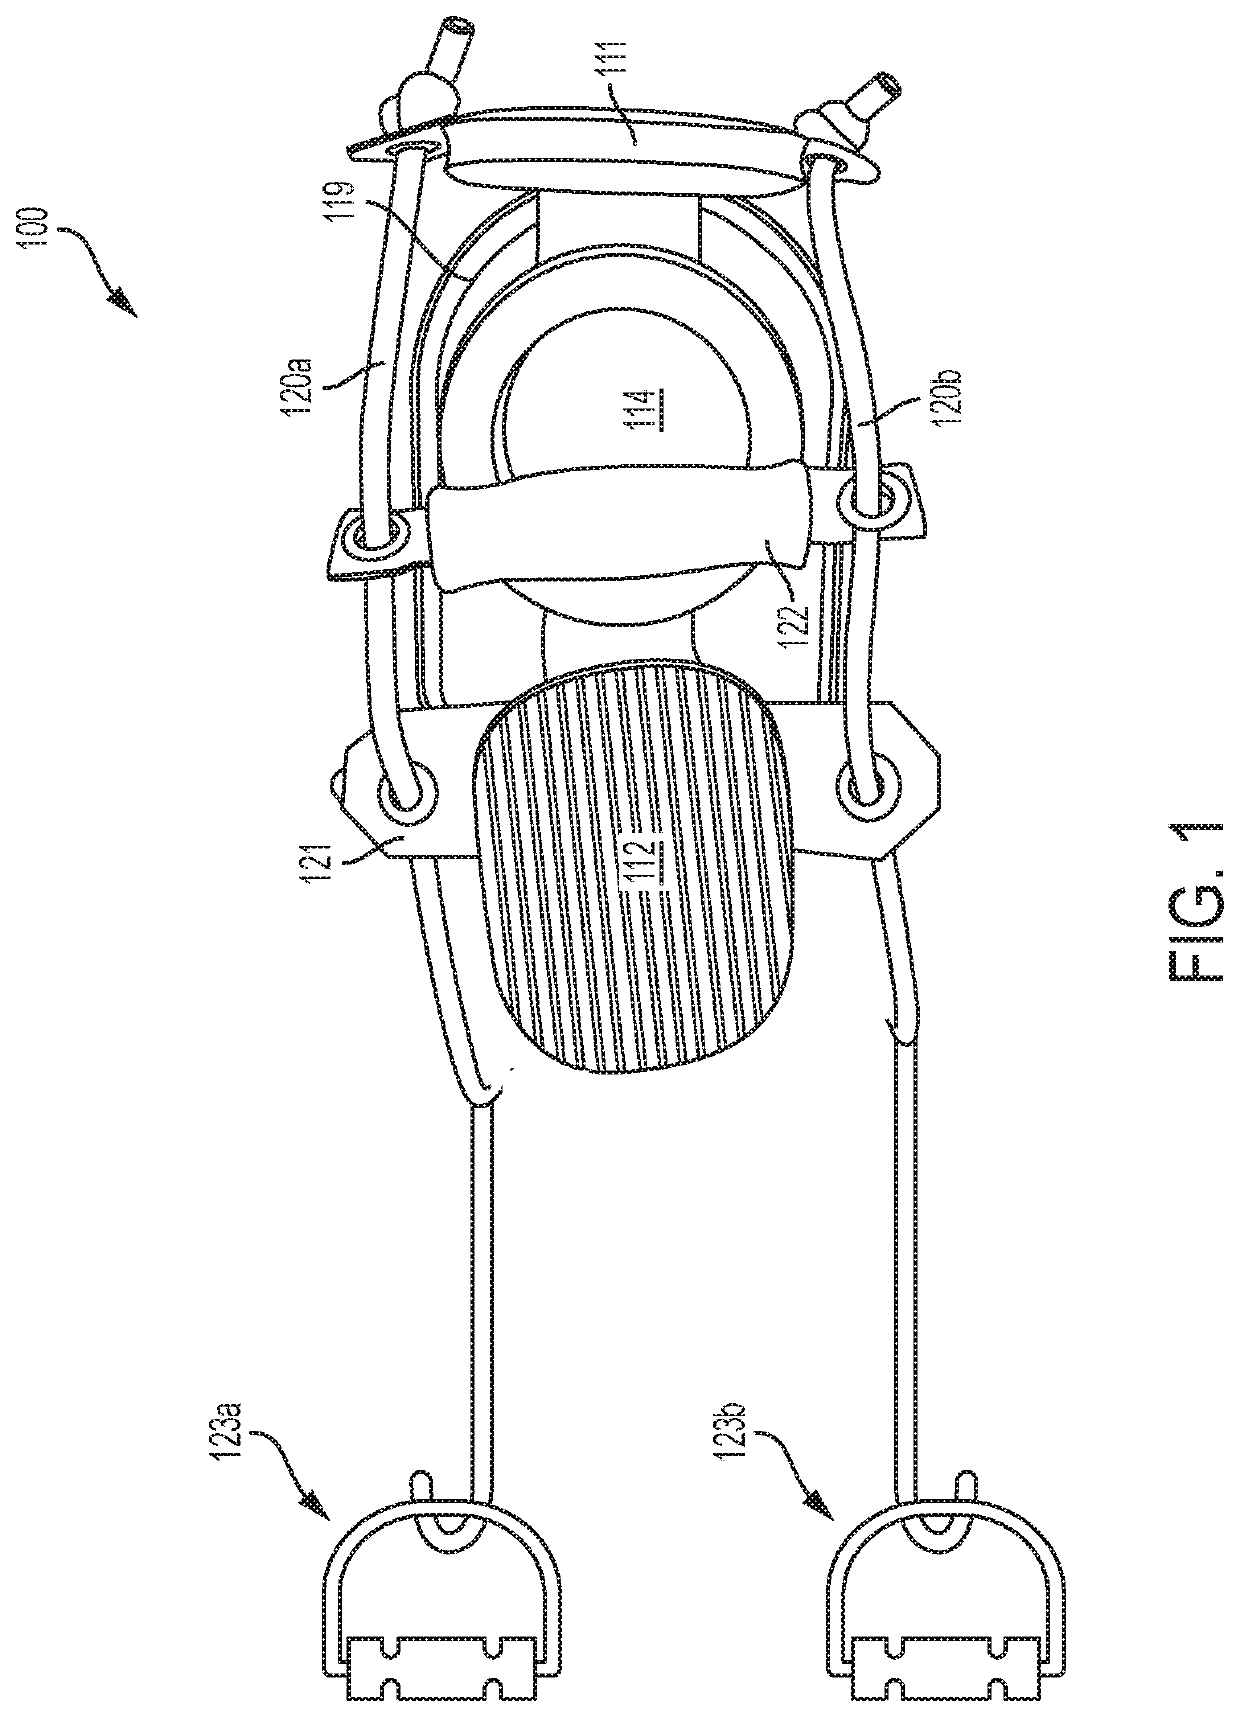 Portable lower limb therapy device